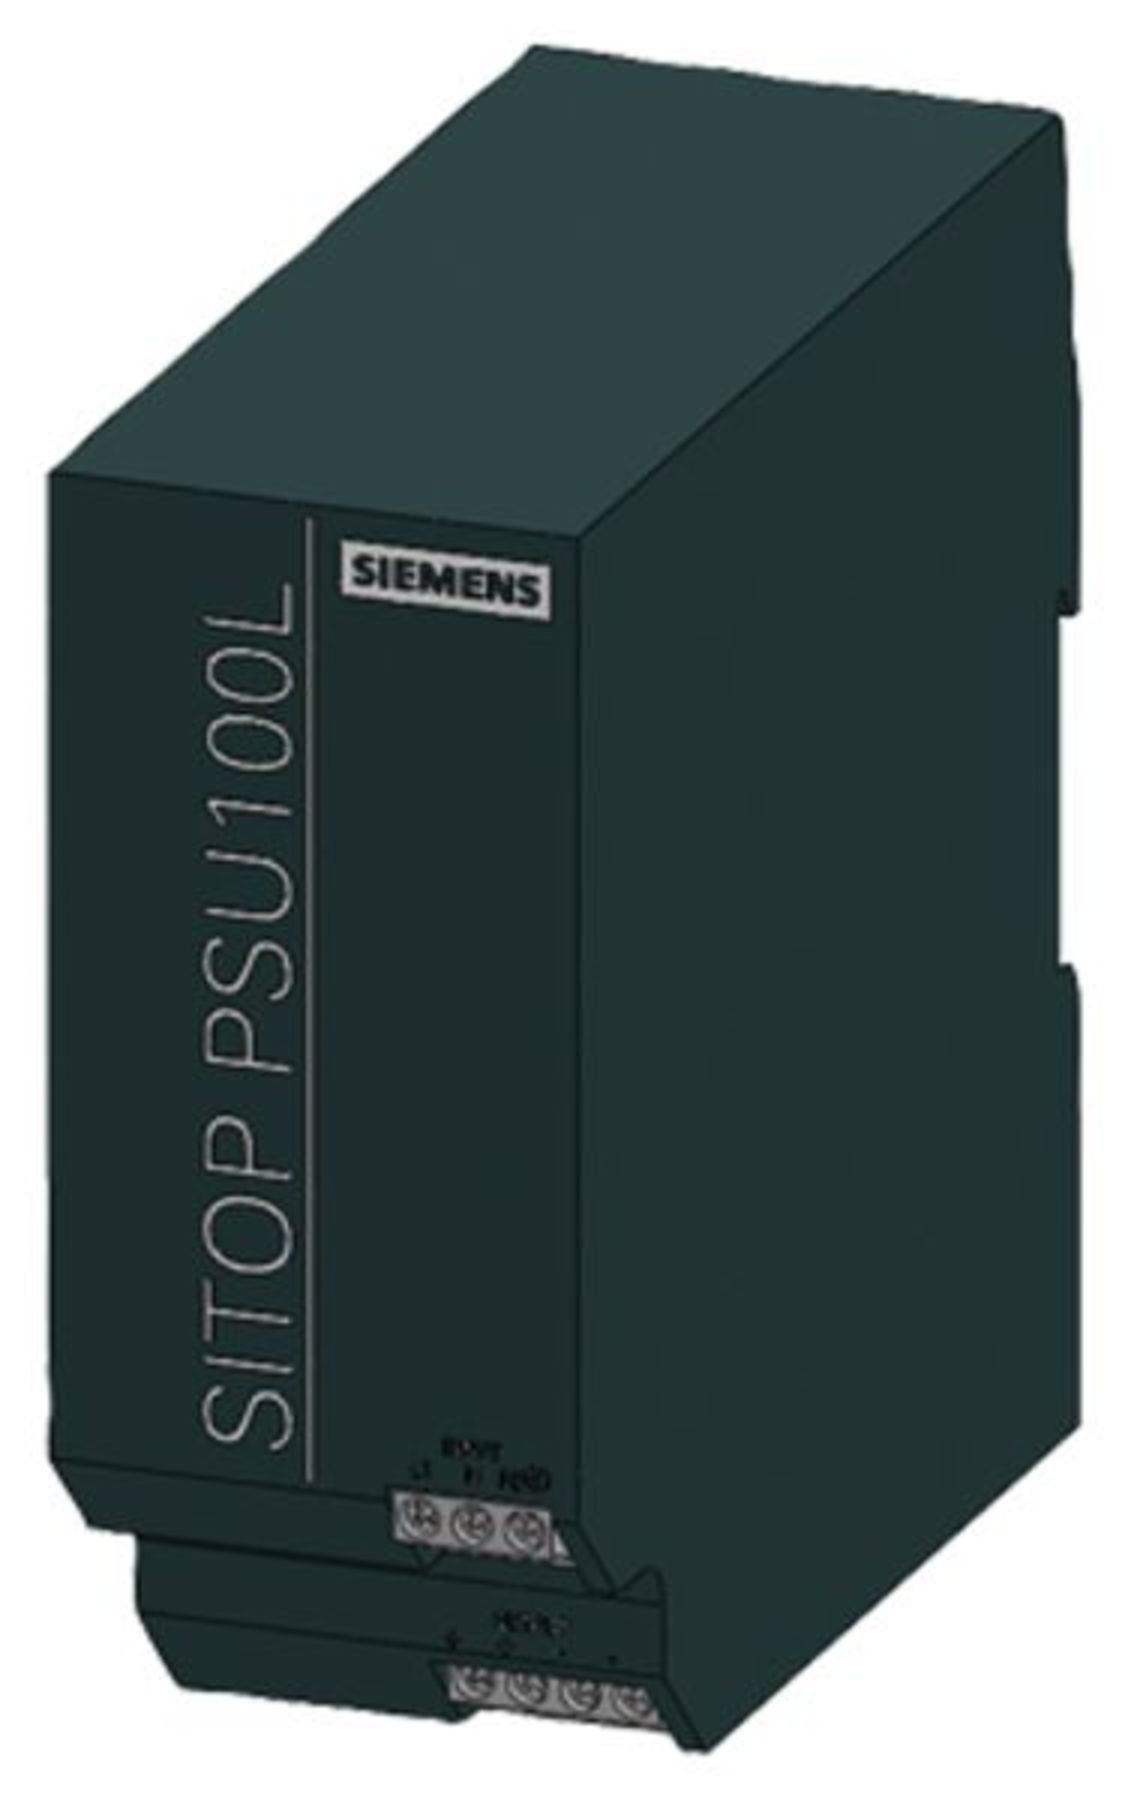 6EP1333-1LB00 Siemens In stock and ready to ship - Santa Clara Systems